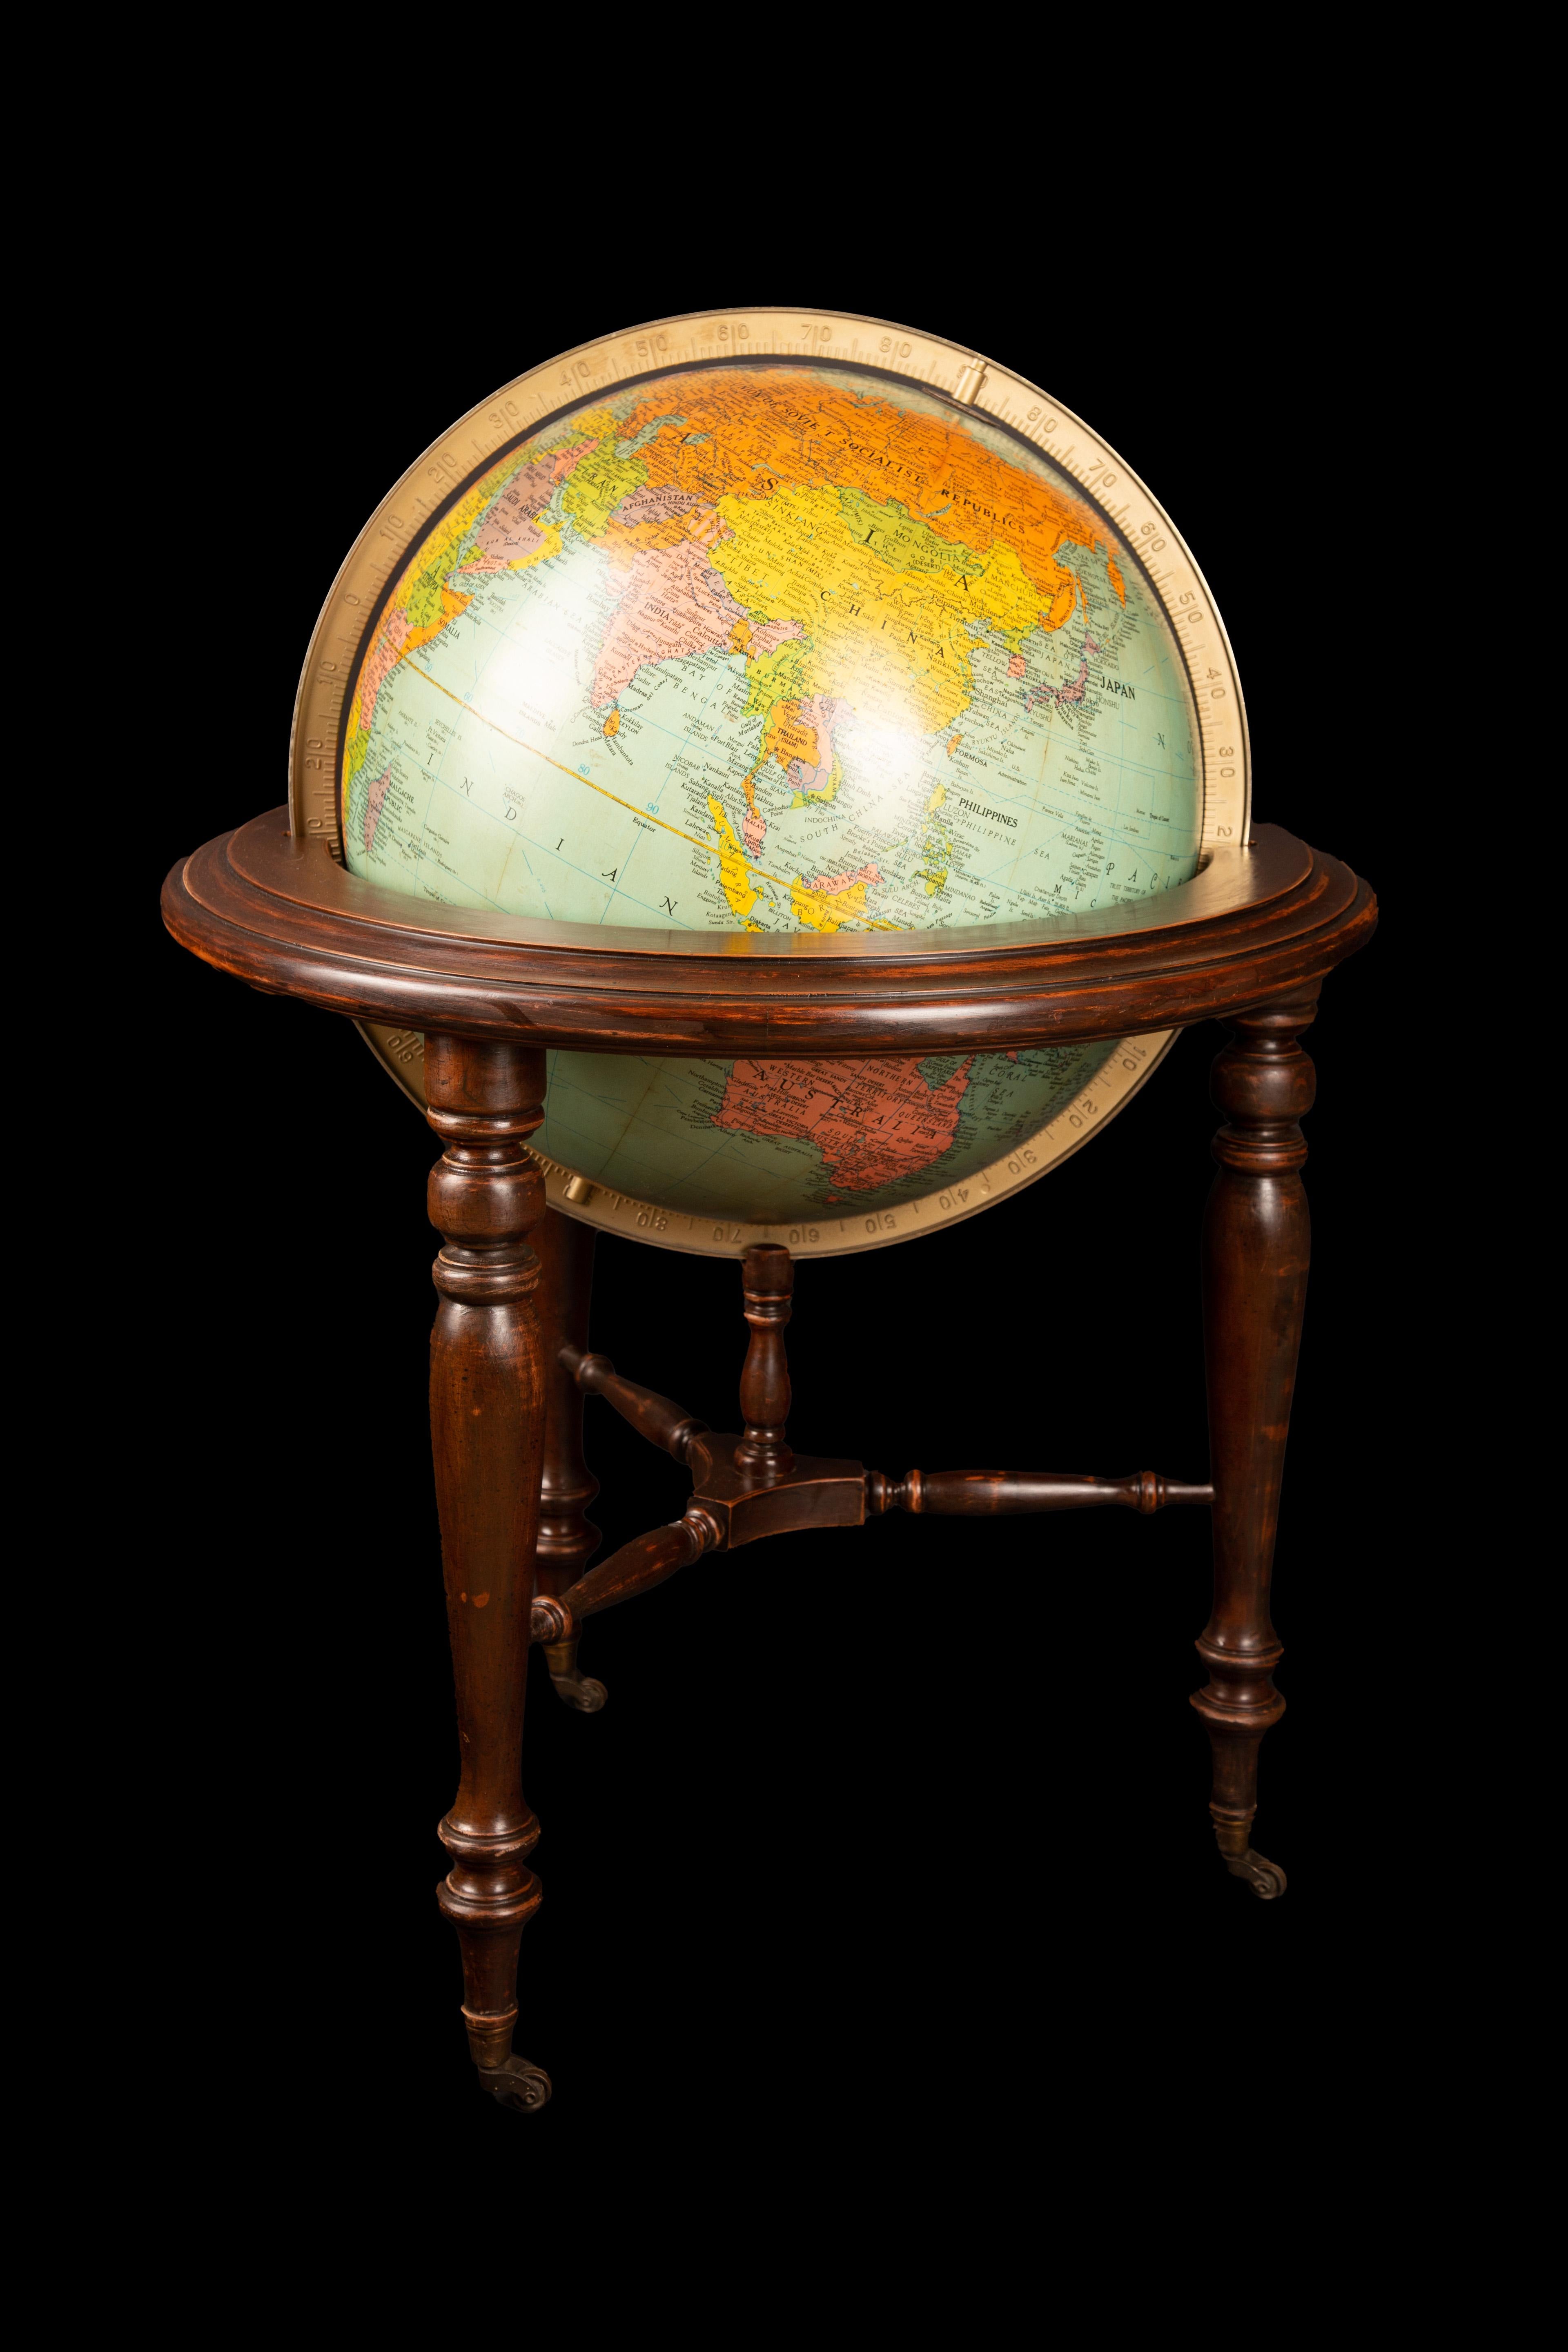 Mid Century Terrestrial Globe on Wooden Stand:

Measures:  23